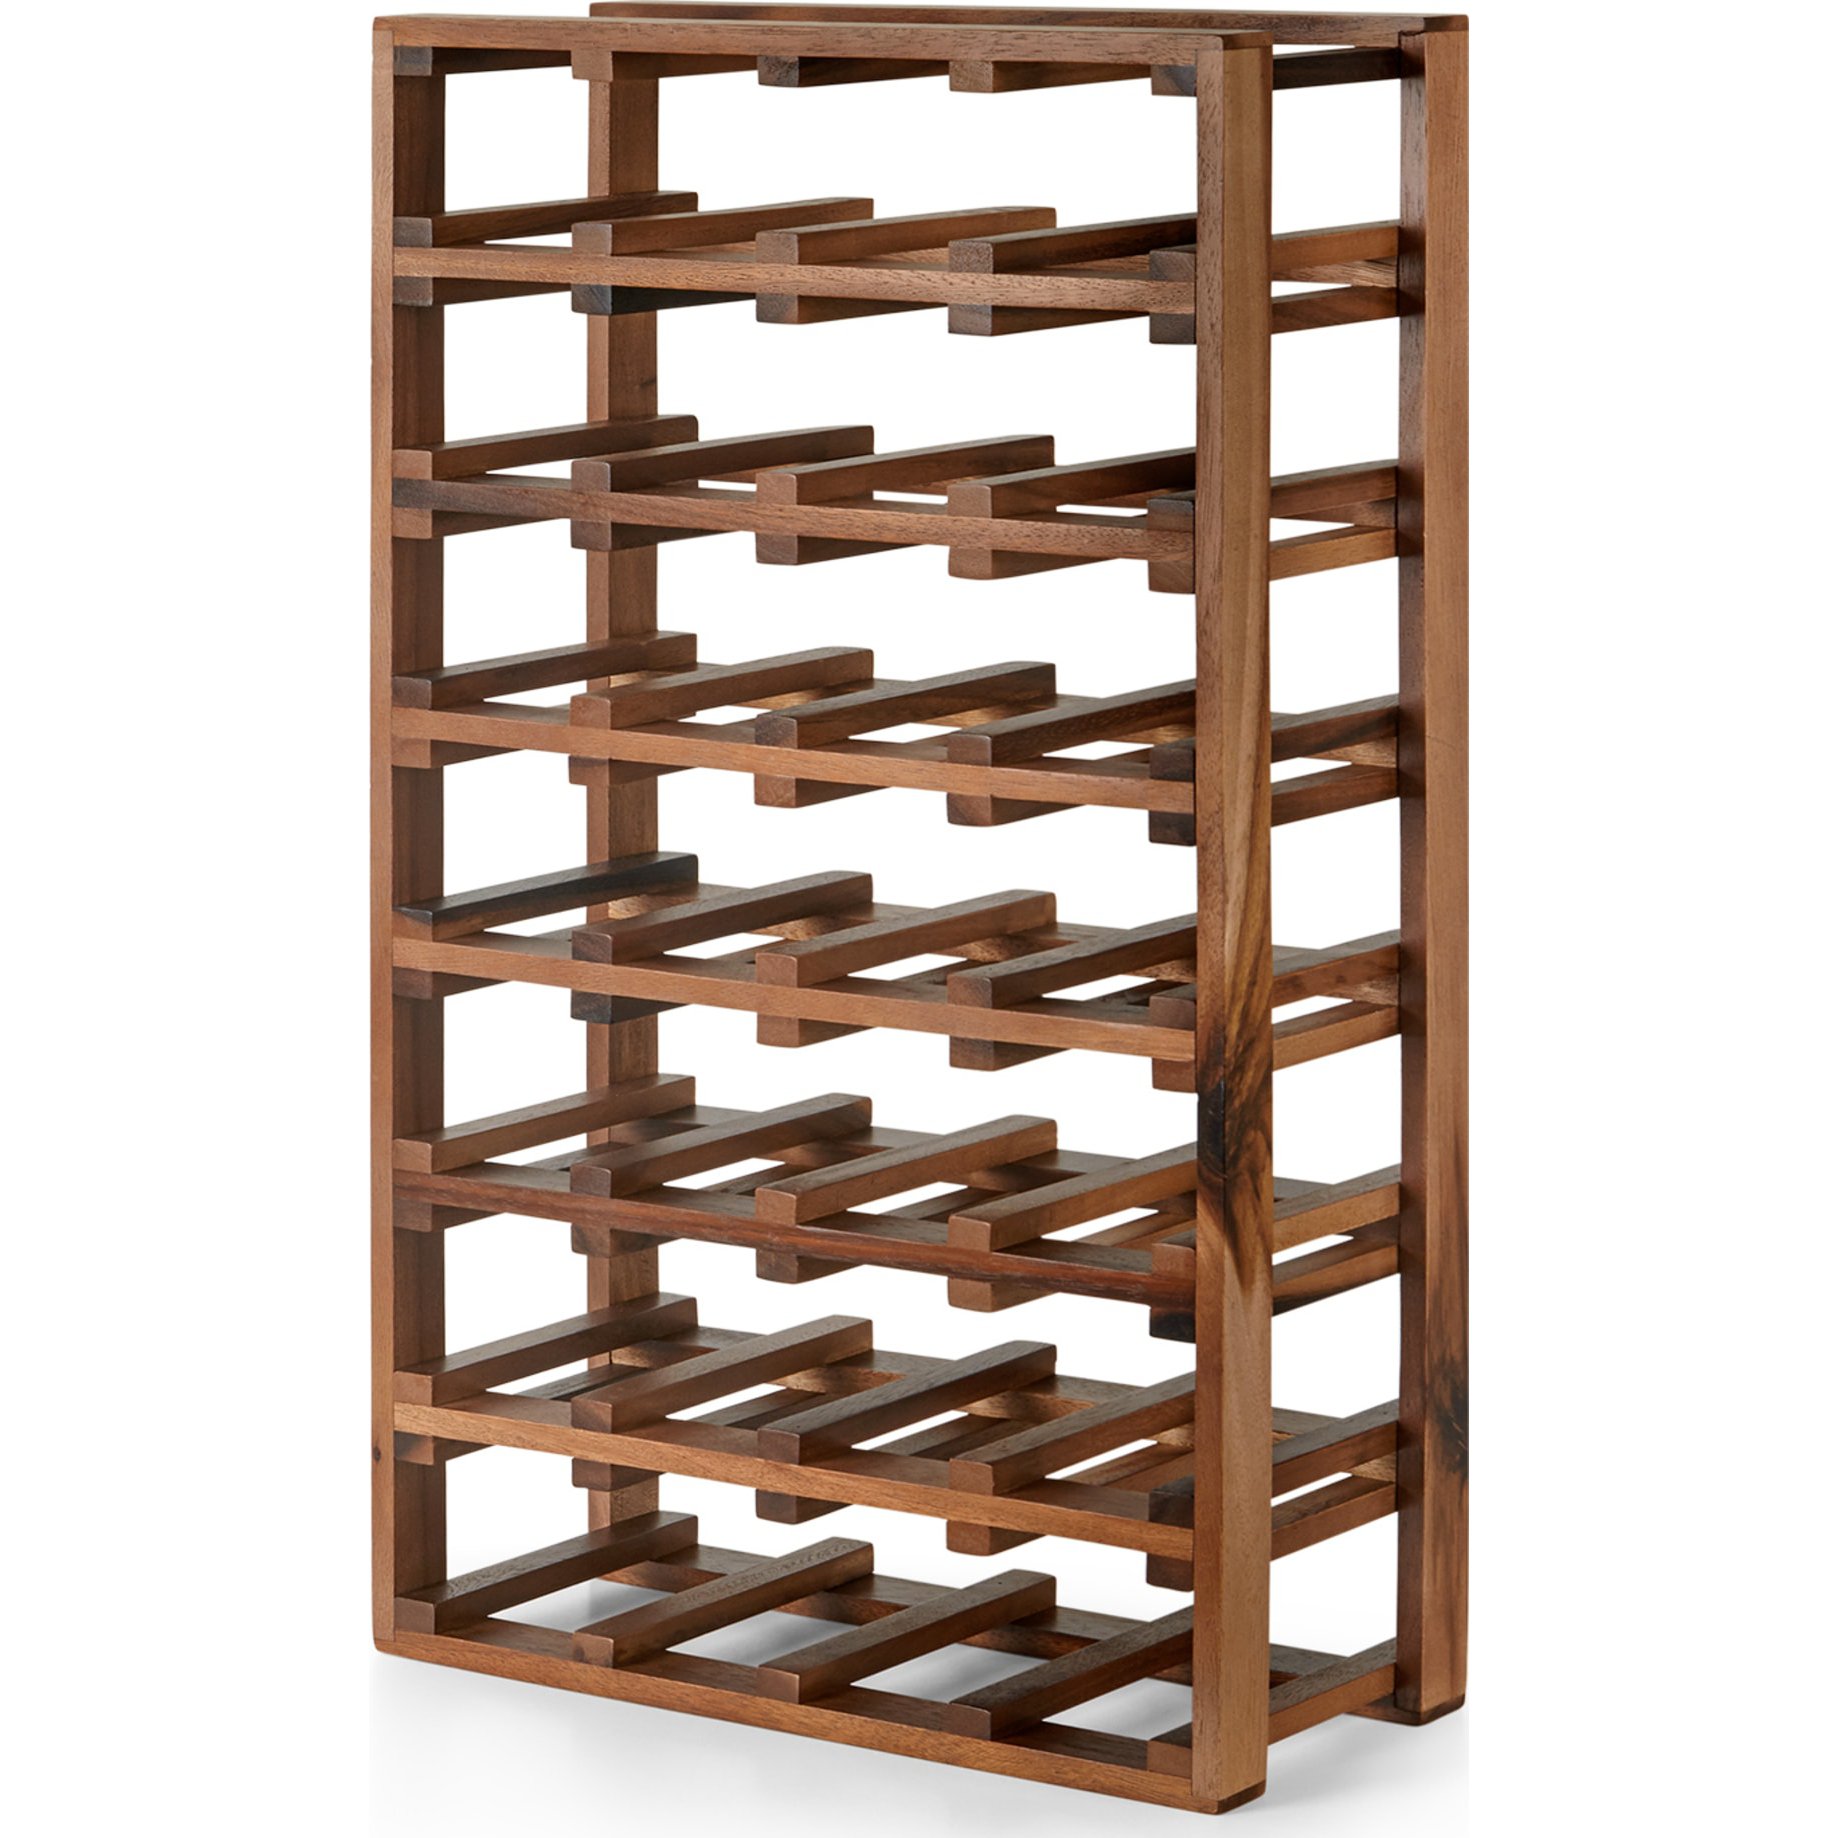 Clover 28 Bottle Wine Rack, Extra Large, Natural Acacia Wood